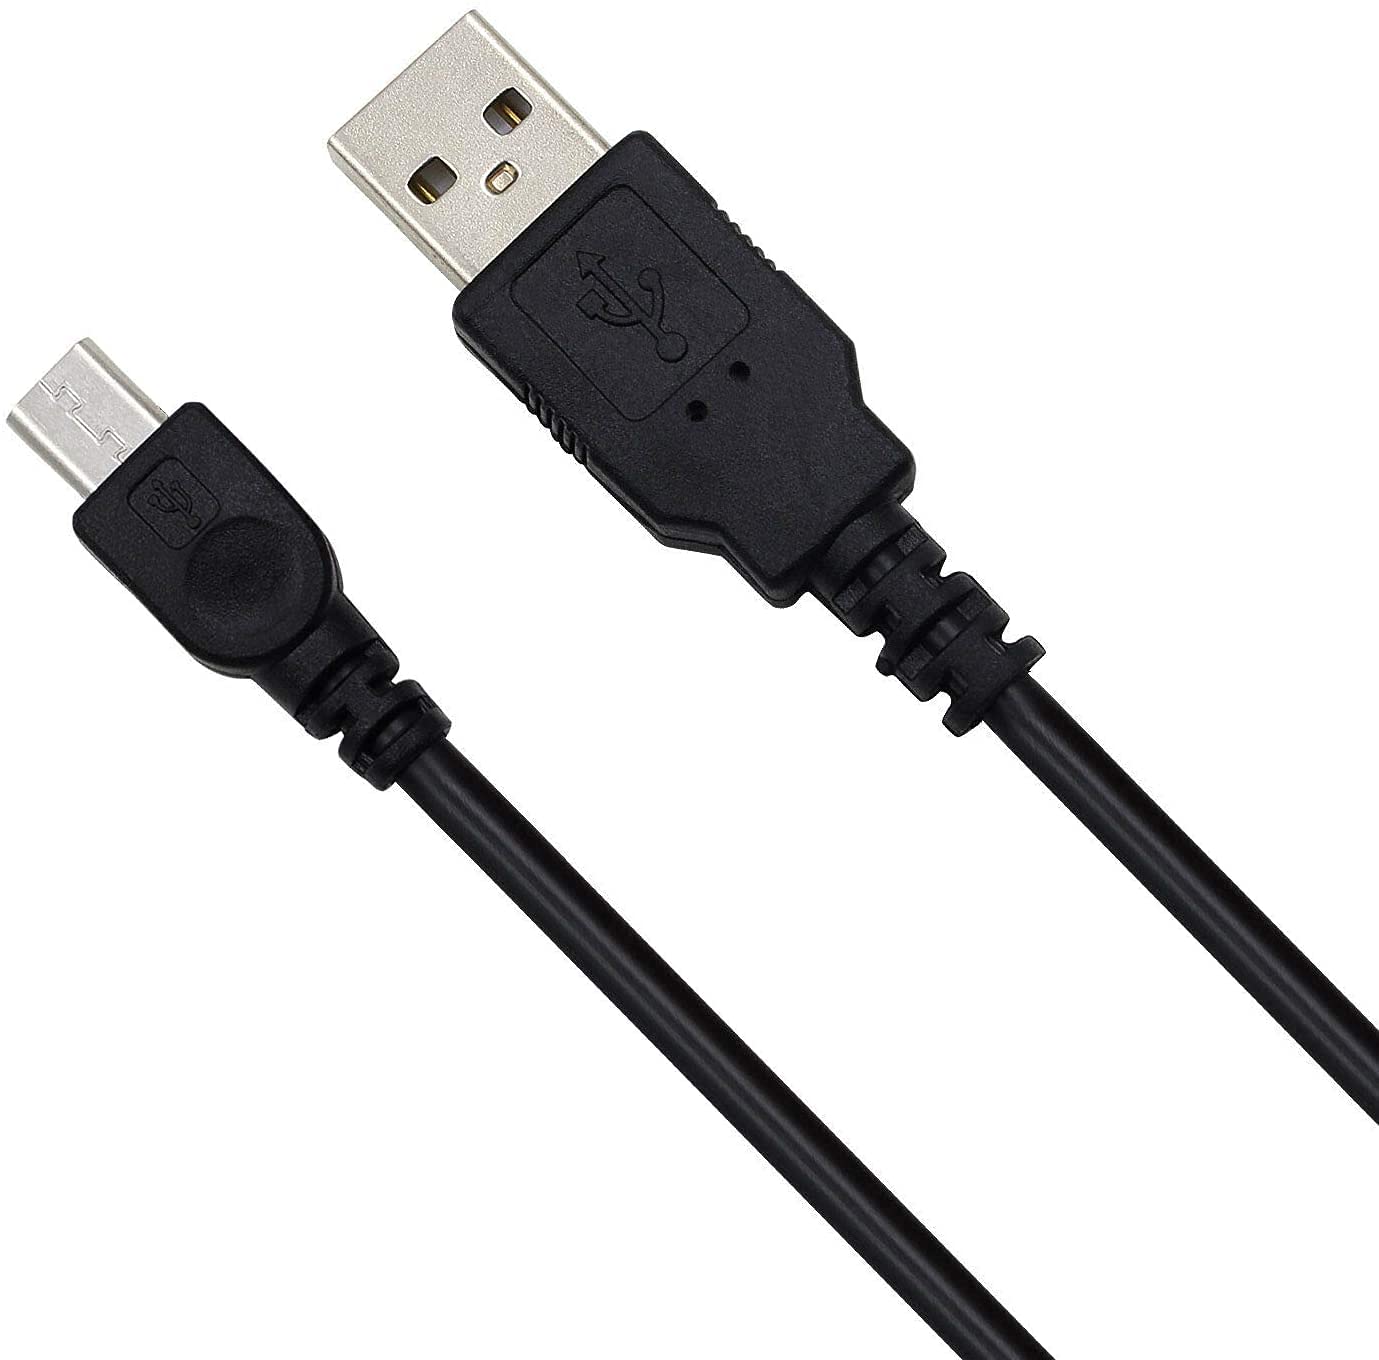 BestCH USB Power Cord Cable for Sony Playstation 3 PS3 Controller SIXAXIS Charger PSU